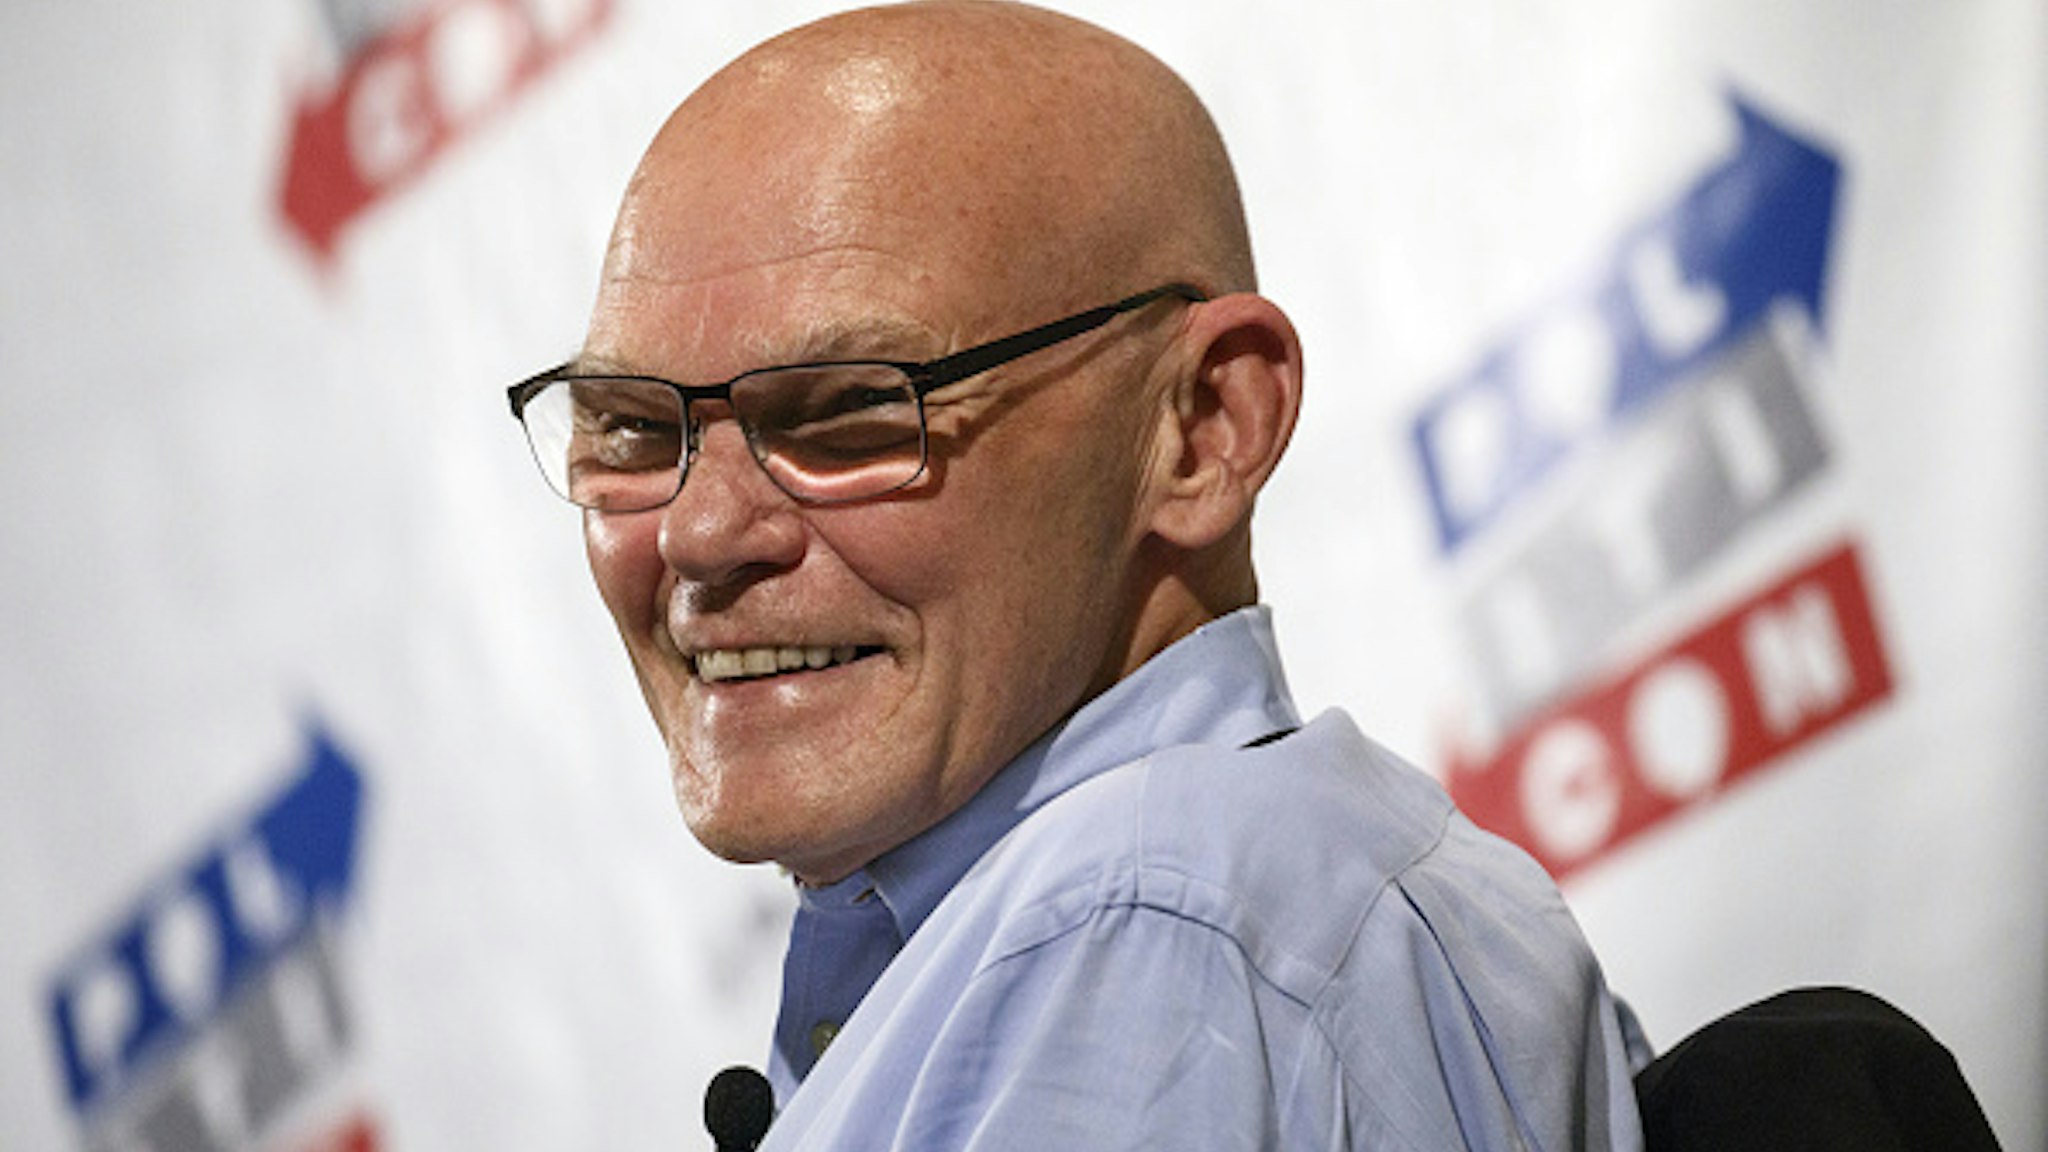 Political commentator James Carville smiles during the Politicon convention inside the Pasadena Convention Center in Pasadena, California, U.S., on Saturday, July 29, 2017. During the third annual Politicon pundits, politicians, comedians and entertainers gather to discuss issues that touch all sides of the political spectrum.